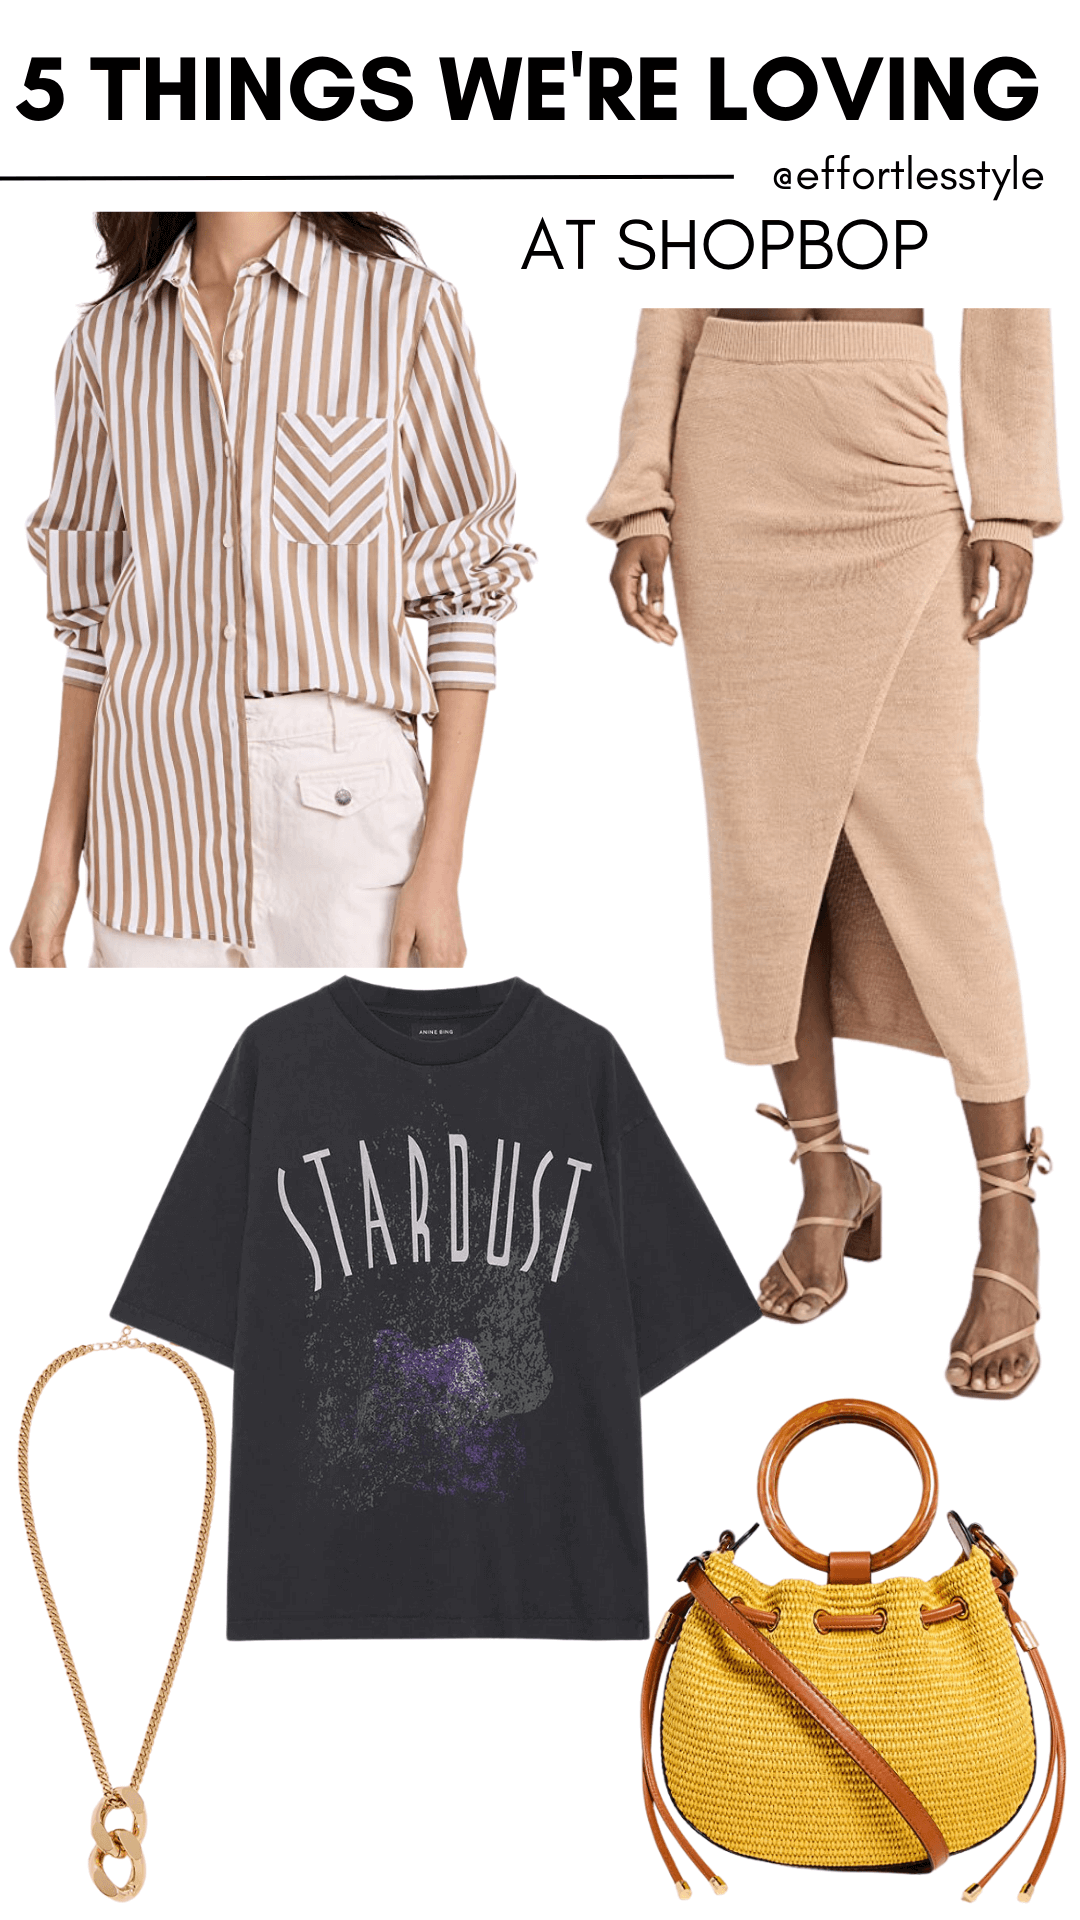 Five Things We Are Loving At Shopbop